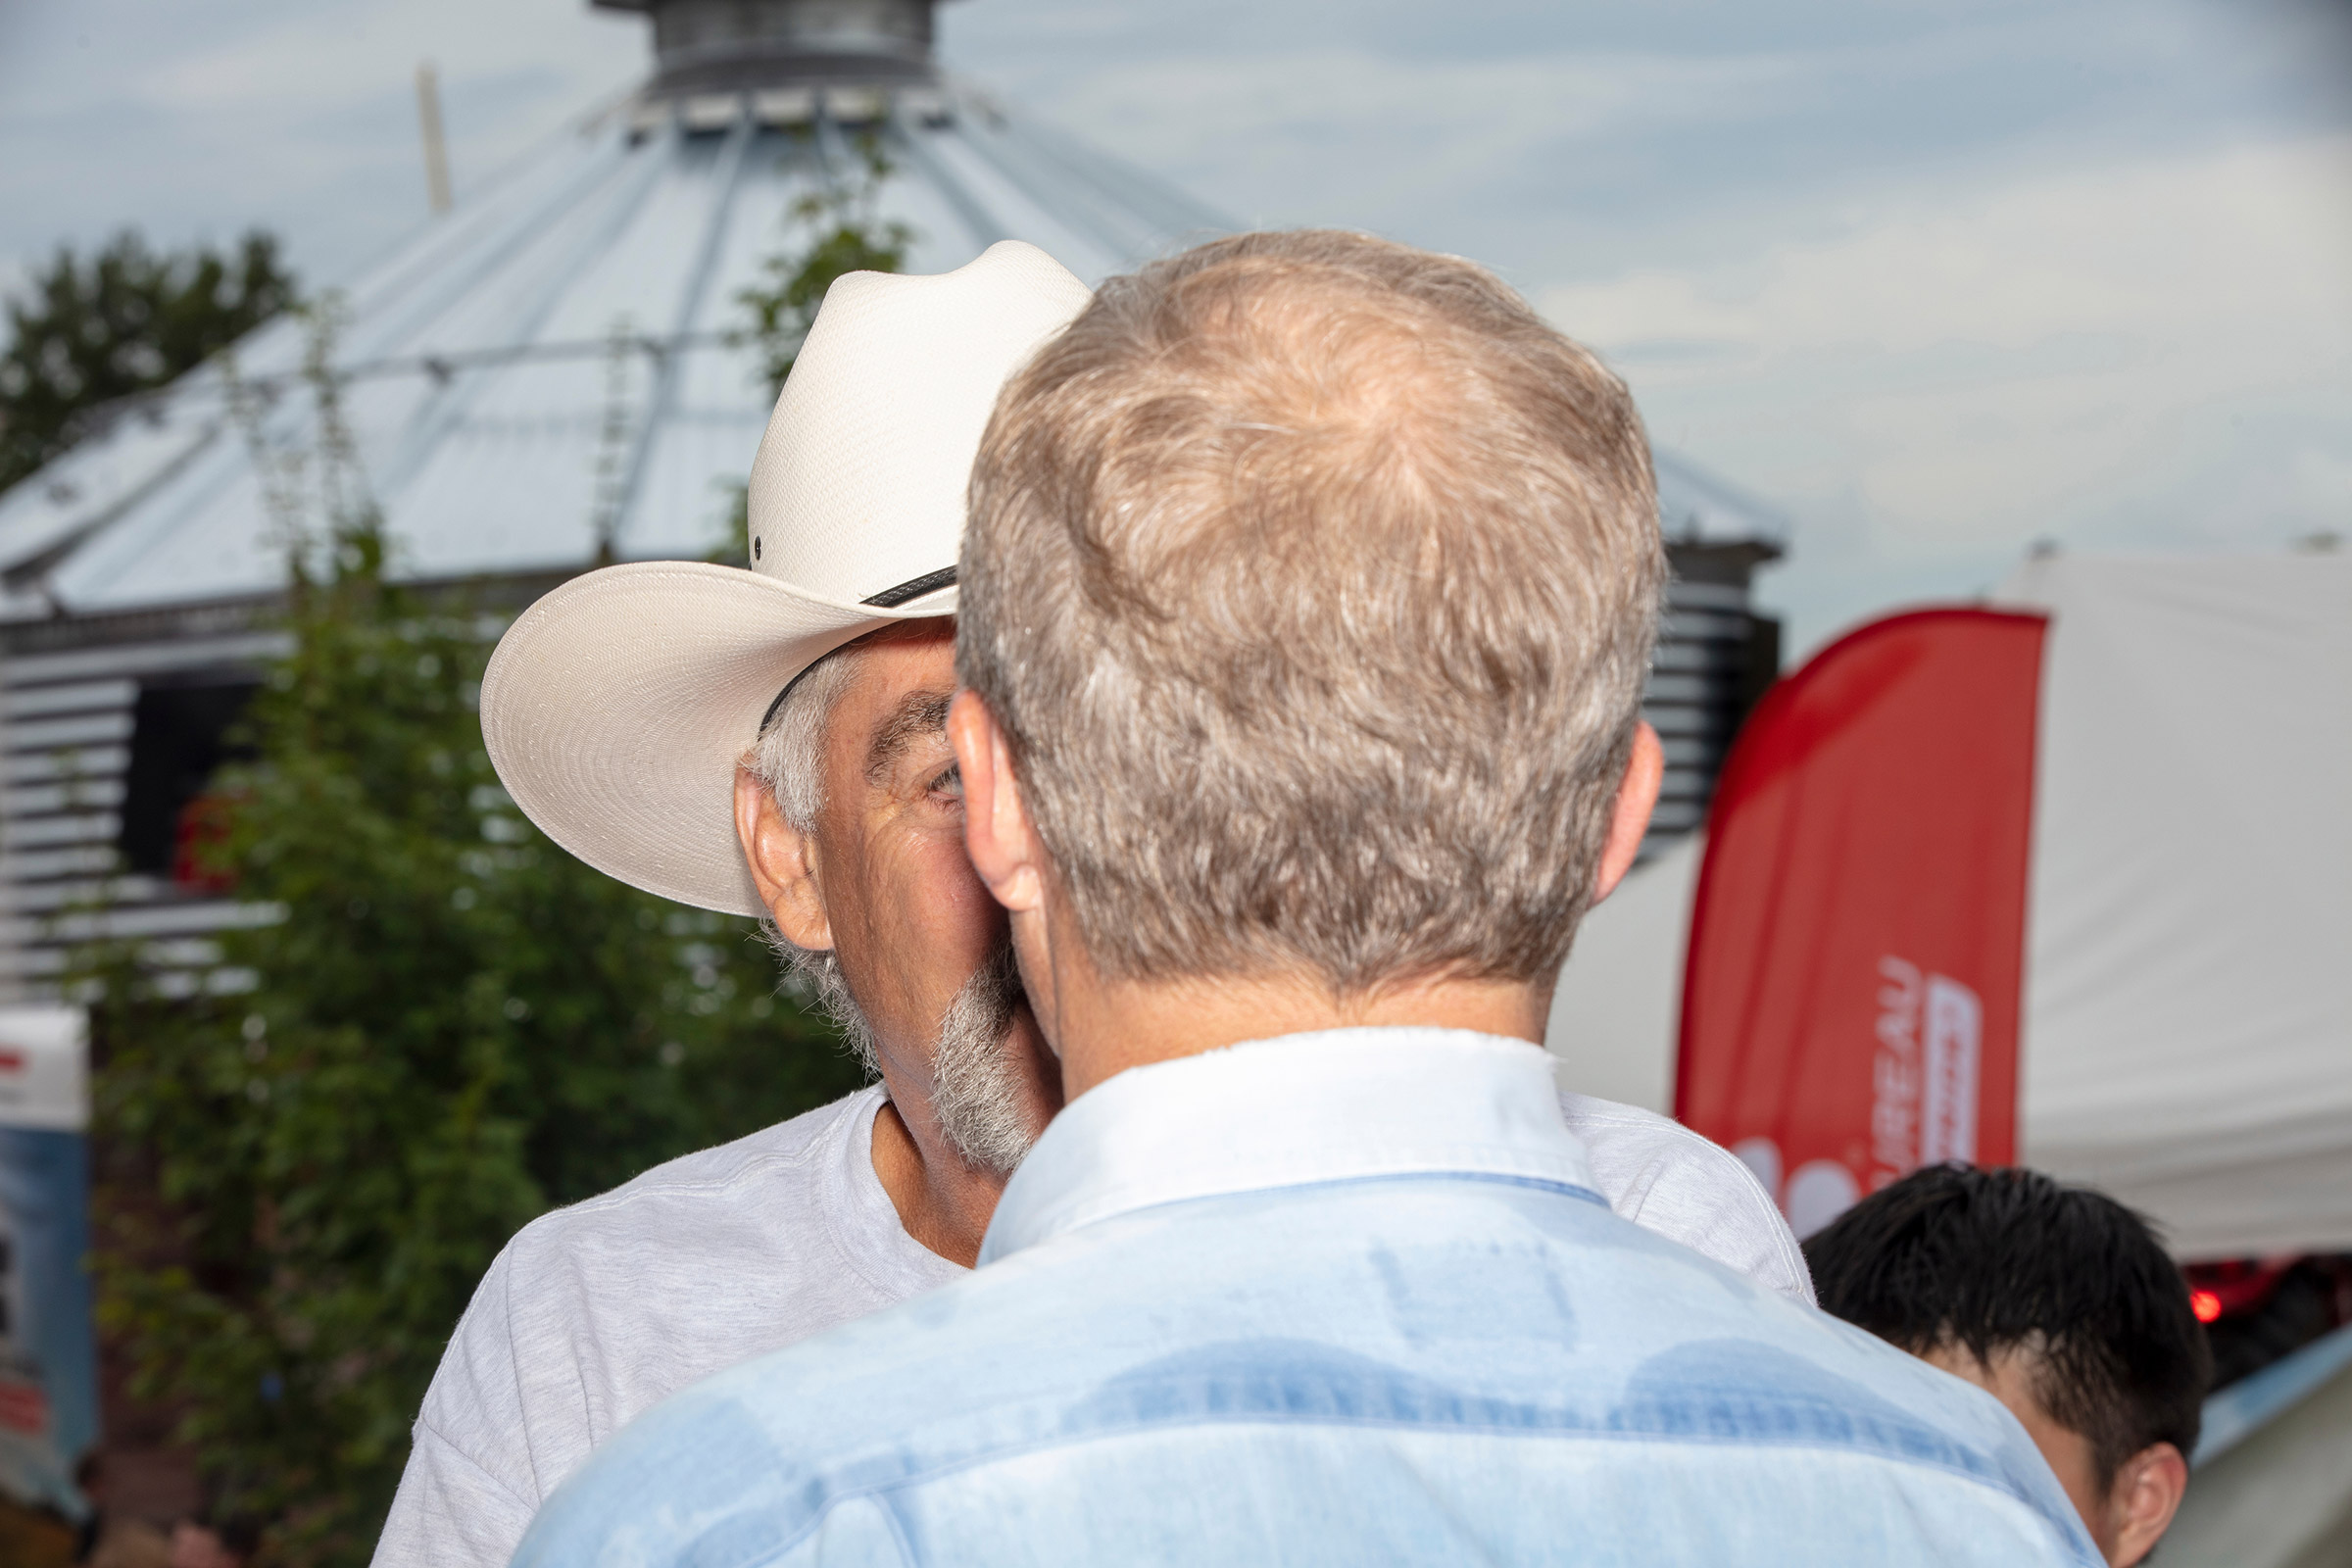 Democratic presidential candidate Tom Steyer speaks with farmer Kyle Gilchrist of Douds, Iowa on Aug. 11. Gilchrist was concerned about how an increasing minimum wage would affect him paying his farm workers. (M. Scott Brauer for TIME)